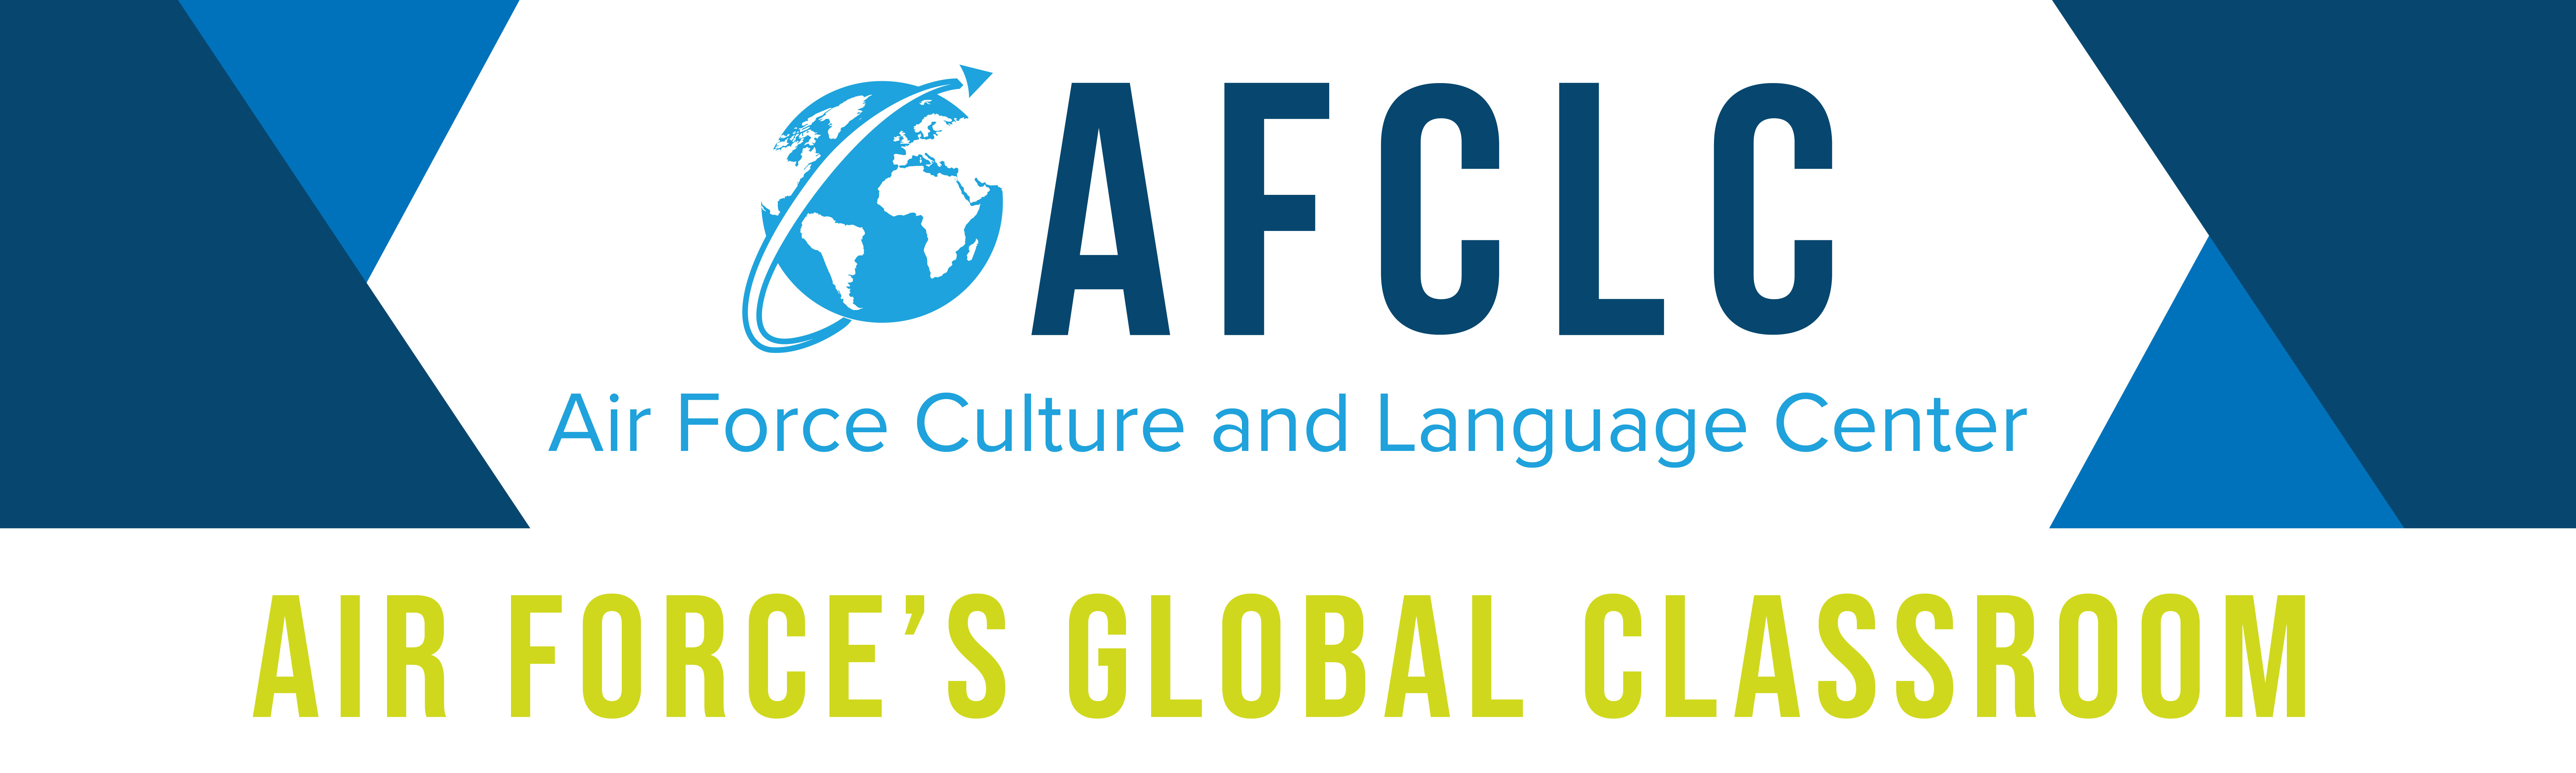 Air Force Culture and Language Center Air Force's Global Classroom